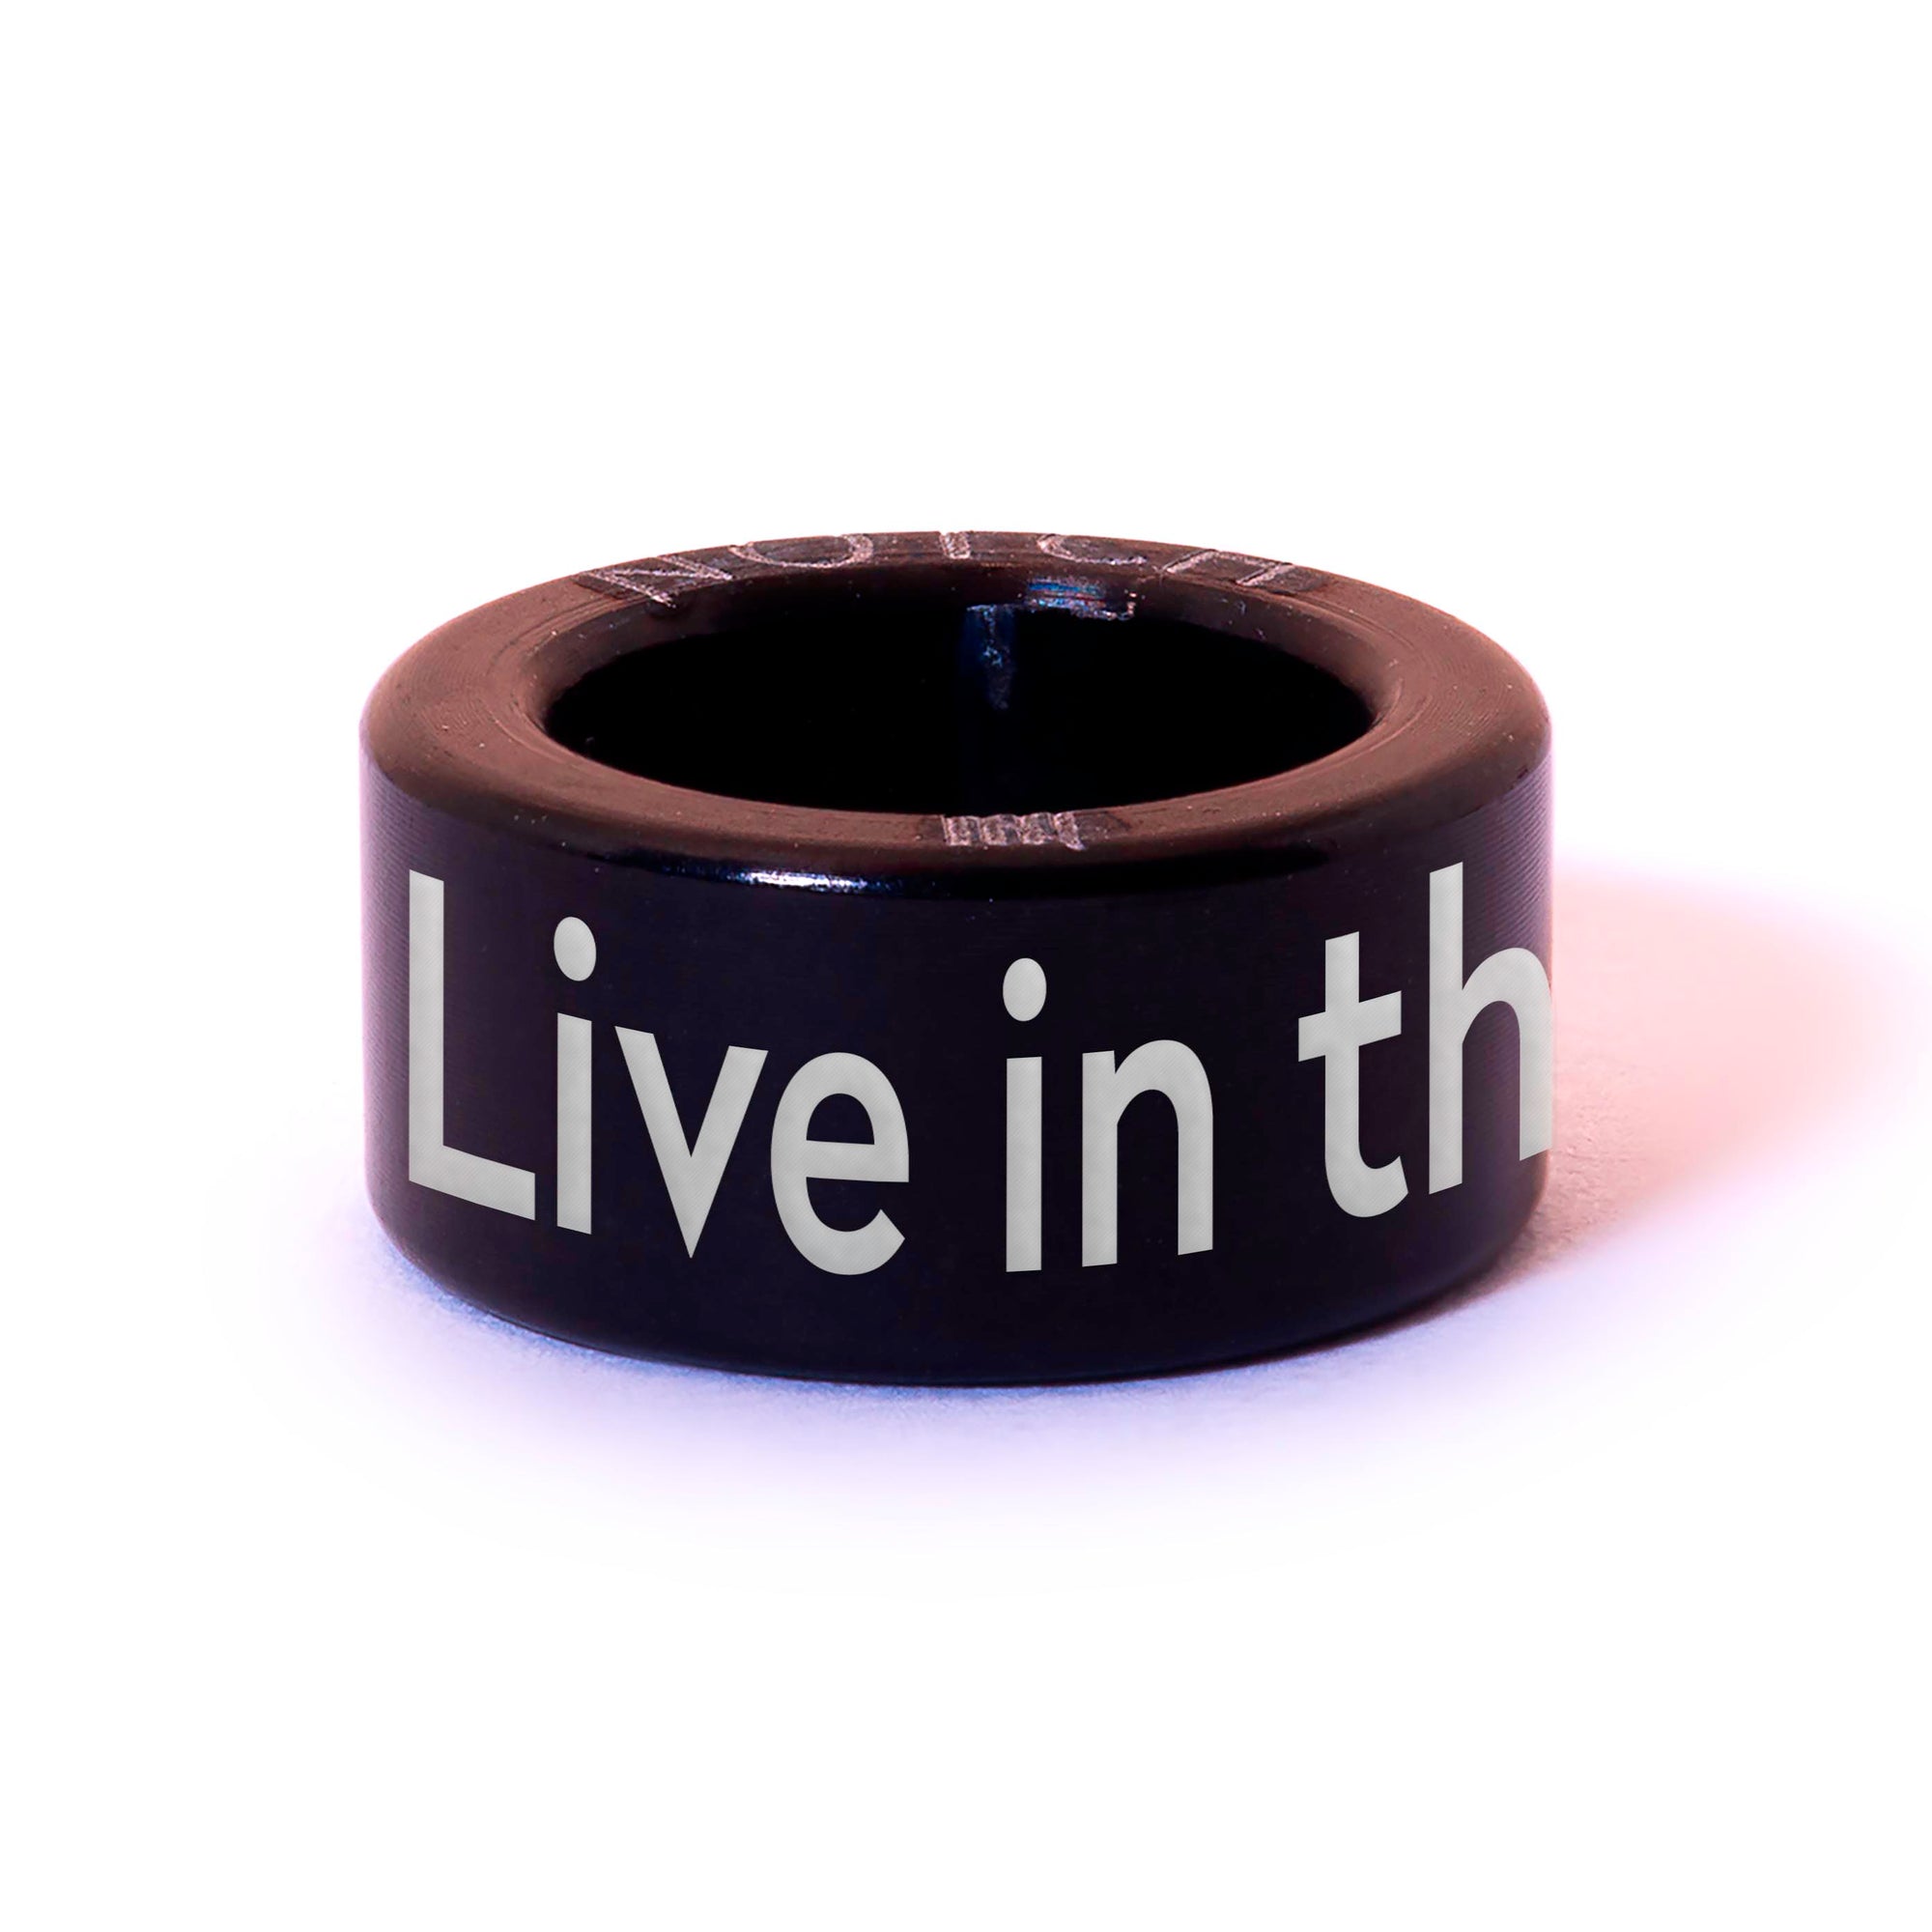 Live in the moment Notch Charm